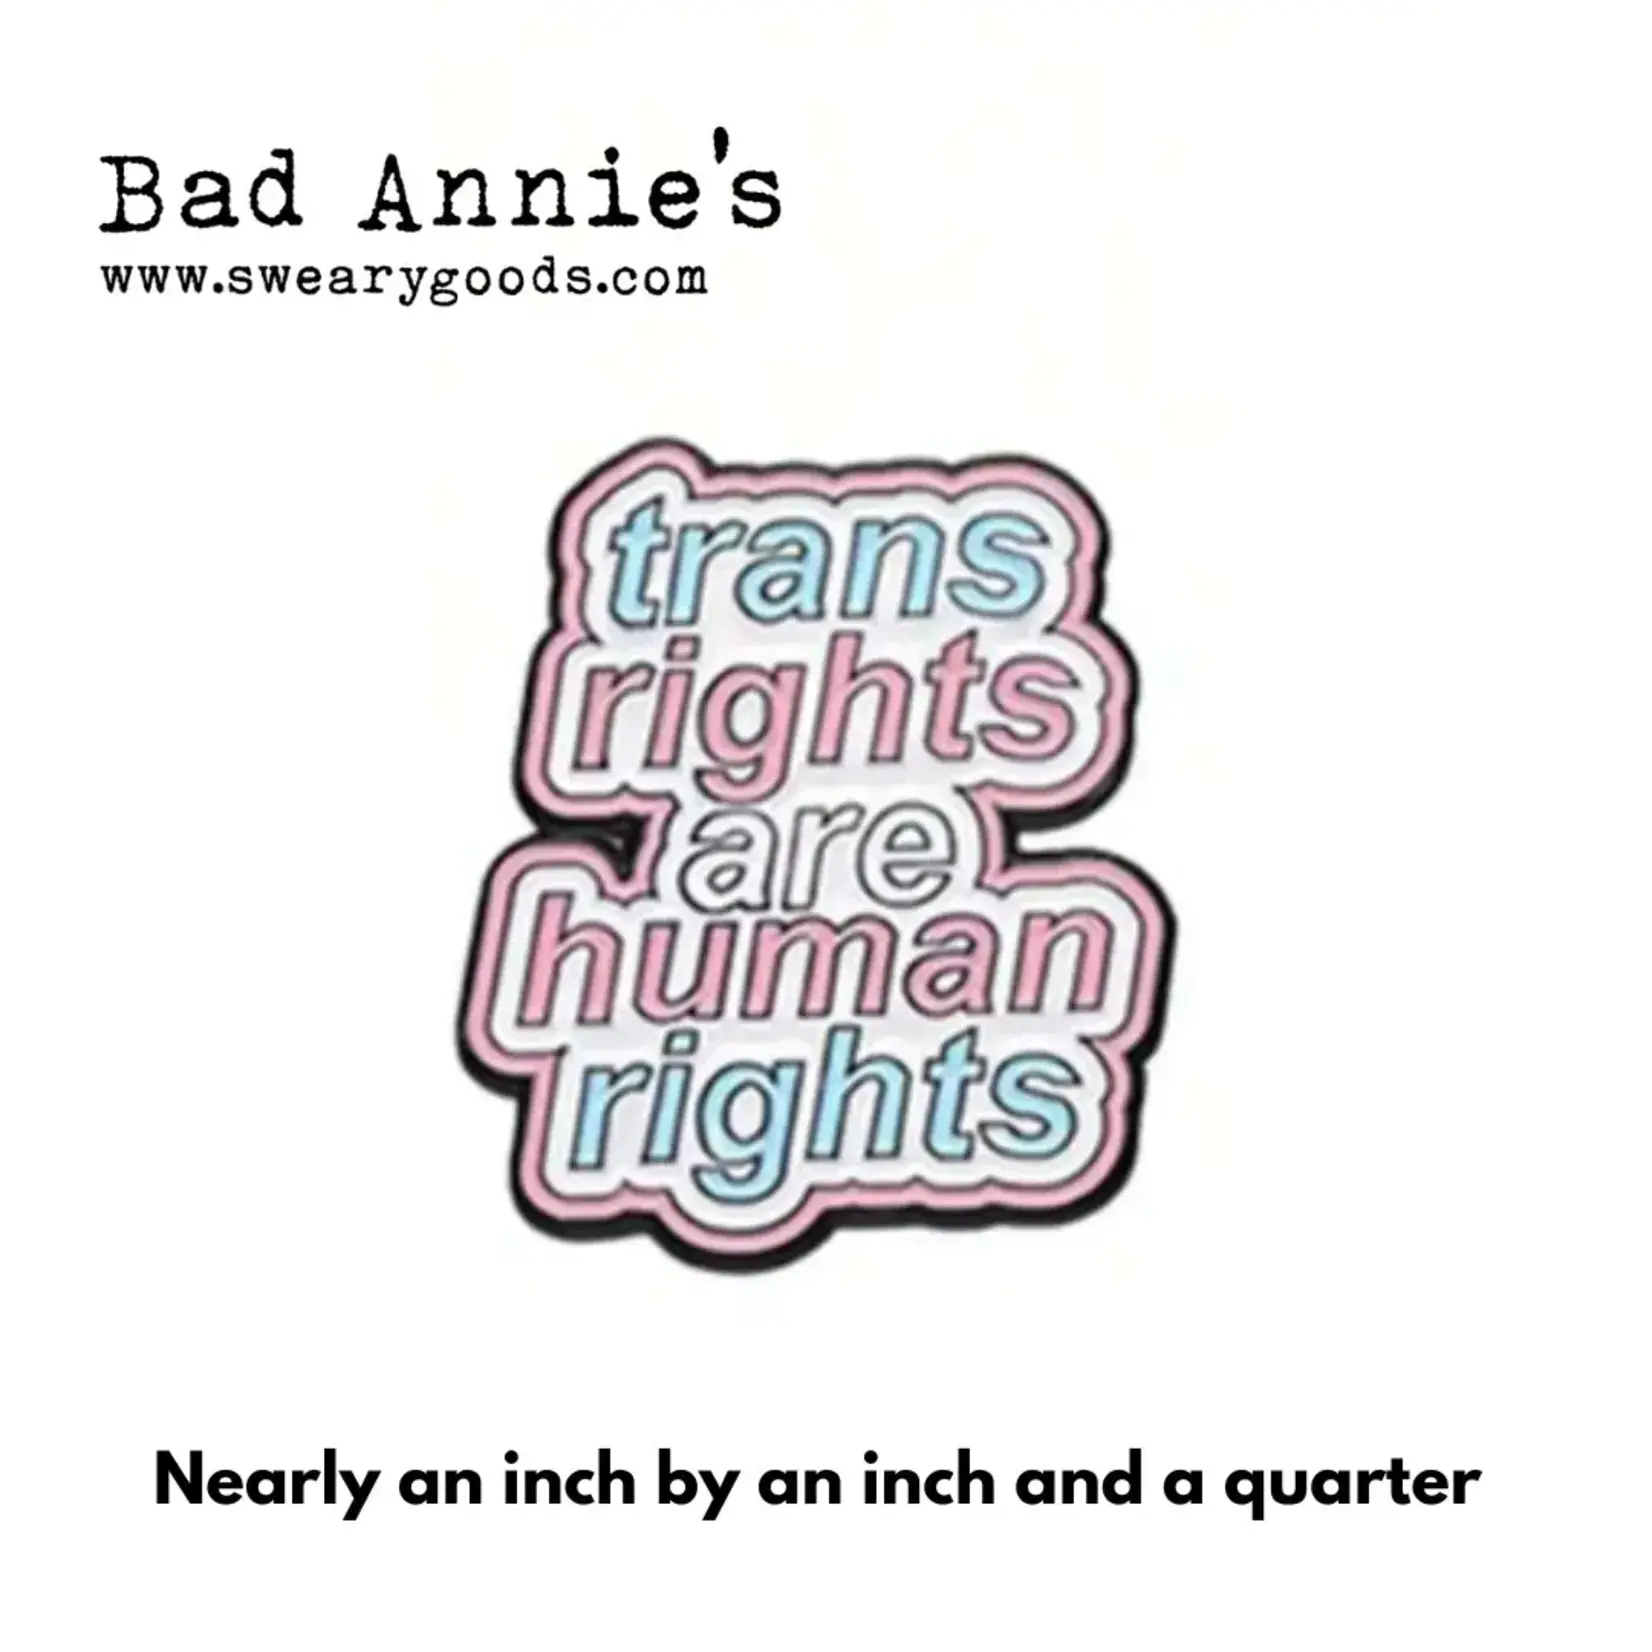 Pin (Enamel) - Trans rights are human rights